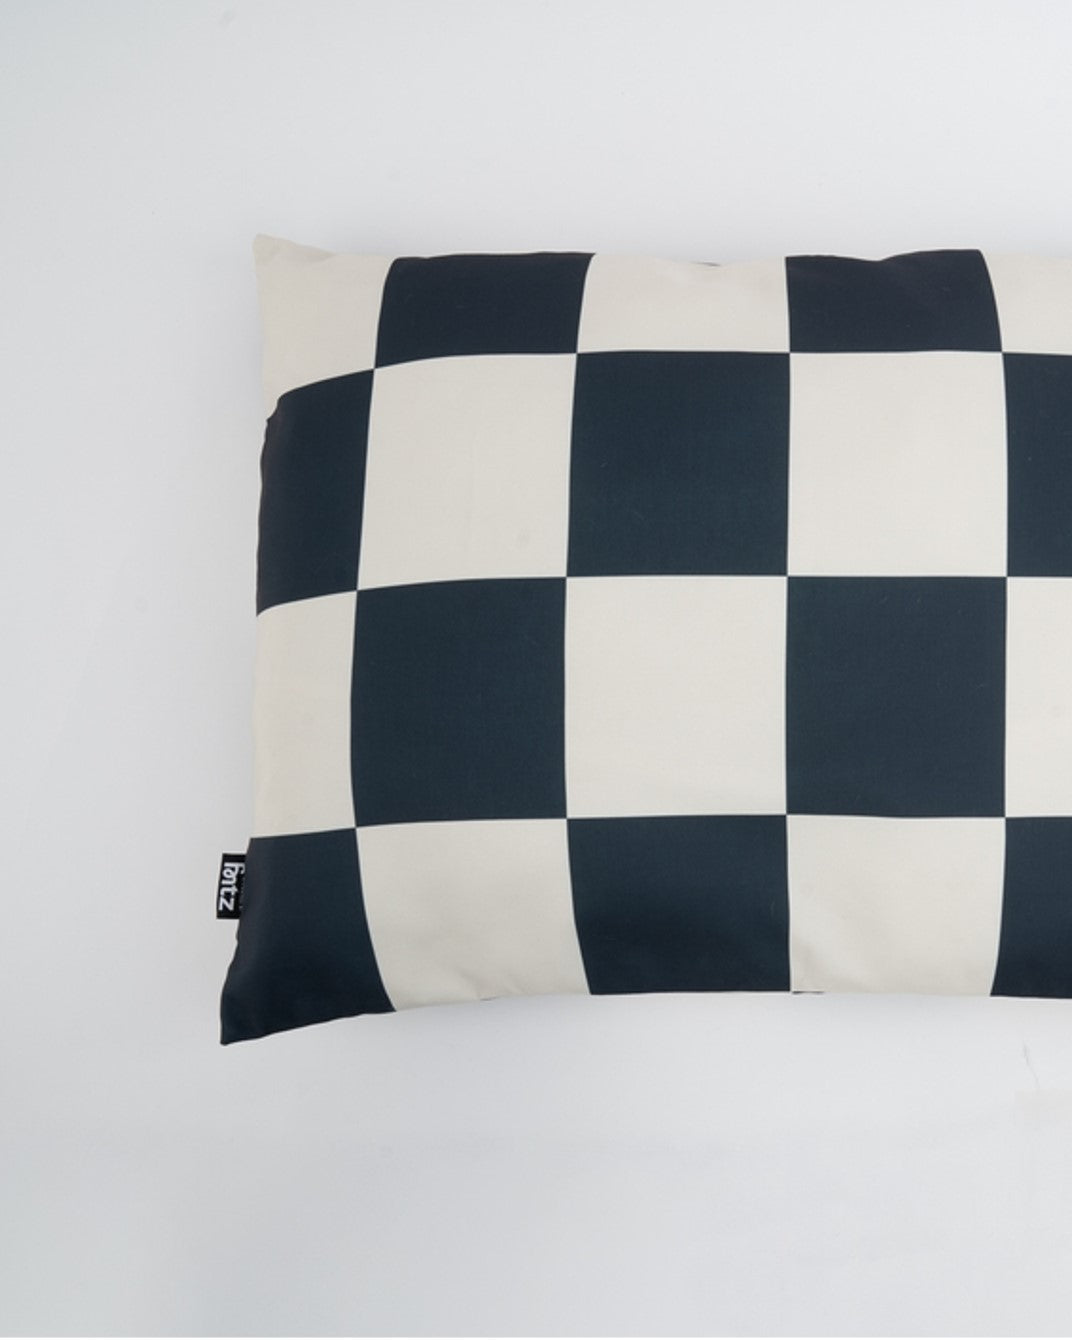 Large Checkered Black and White Dog Bed